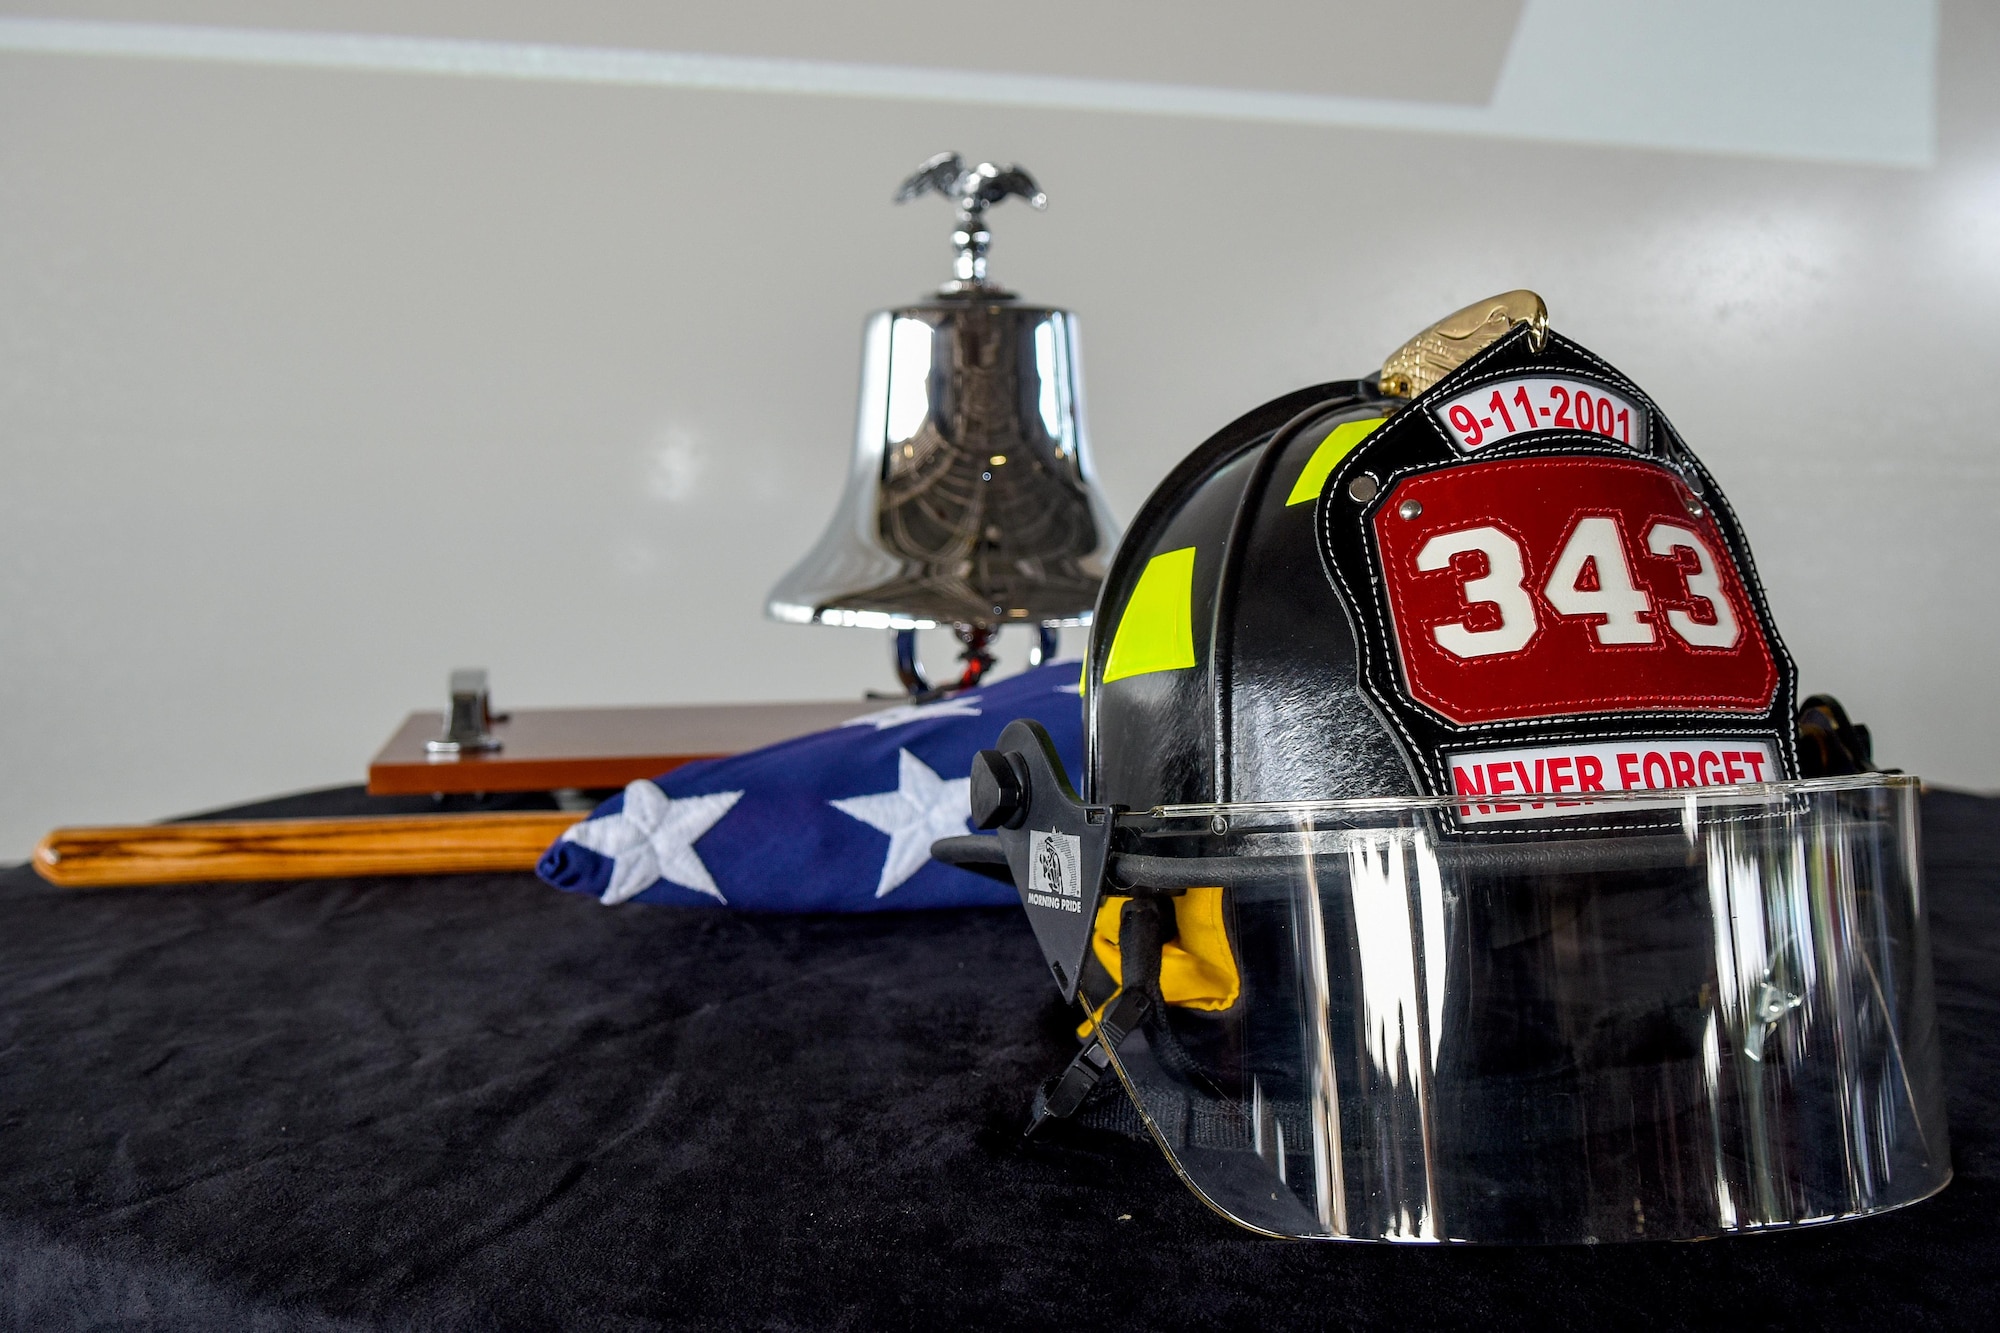 A helmet and bell are front and center at a 9/11 Remembrance ceremony, Sept. 11, 2016, at Seymour Johnson Air Force Base, North Carolina. The helmet bears the date of 9/11 and the number 343, representing the number of first responders who perished at Ground Zero. (U.S. Air Force photo by Airman Shawna L. Keyes)